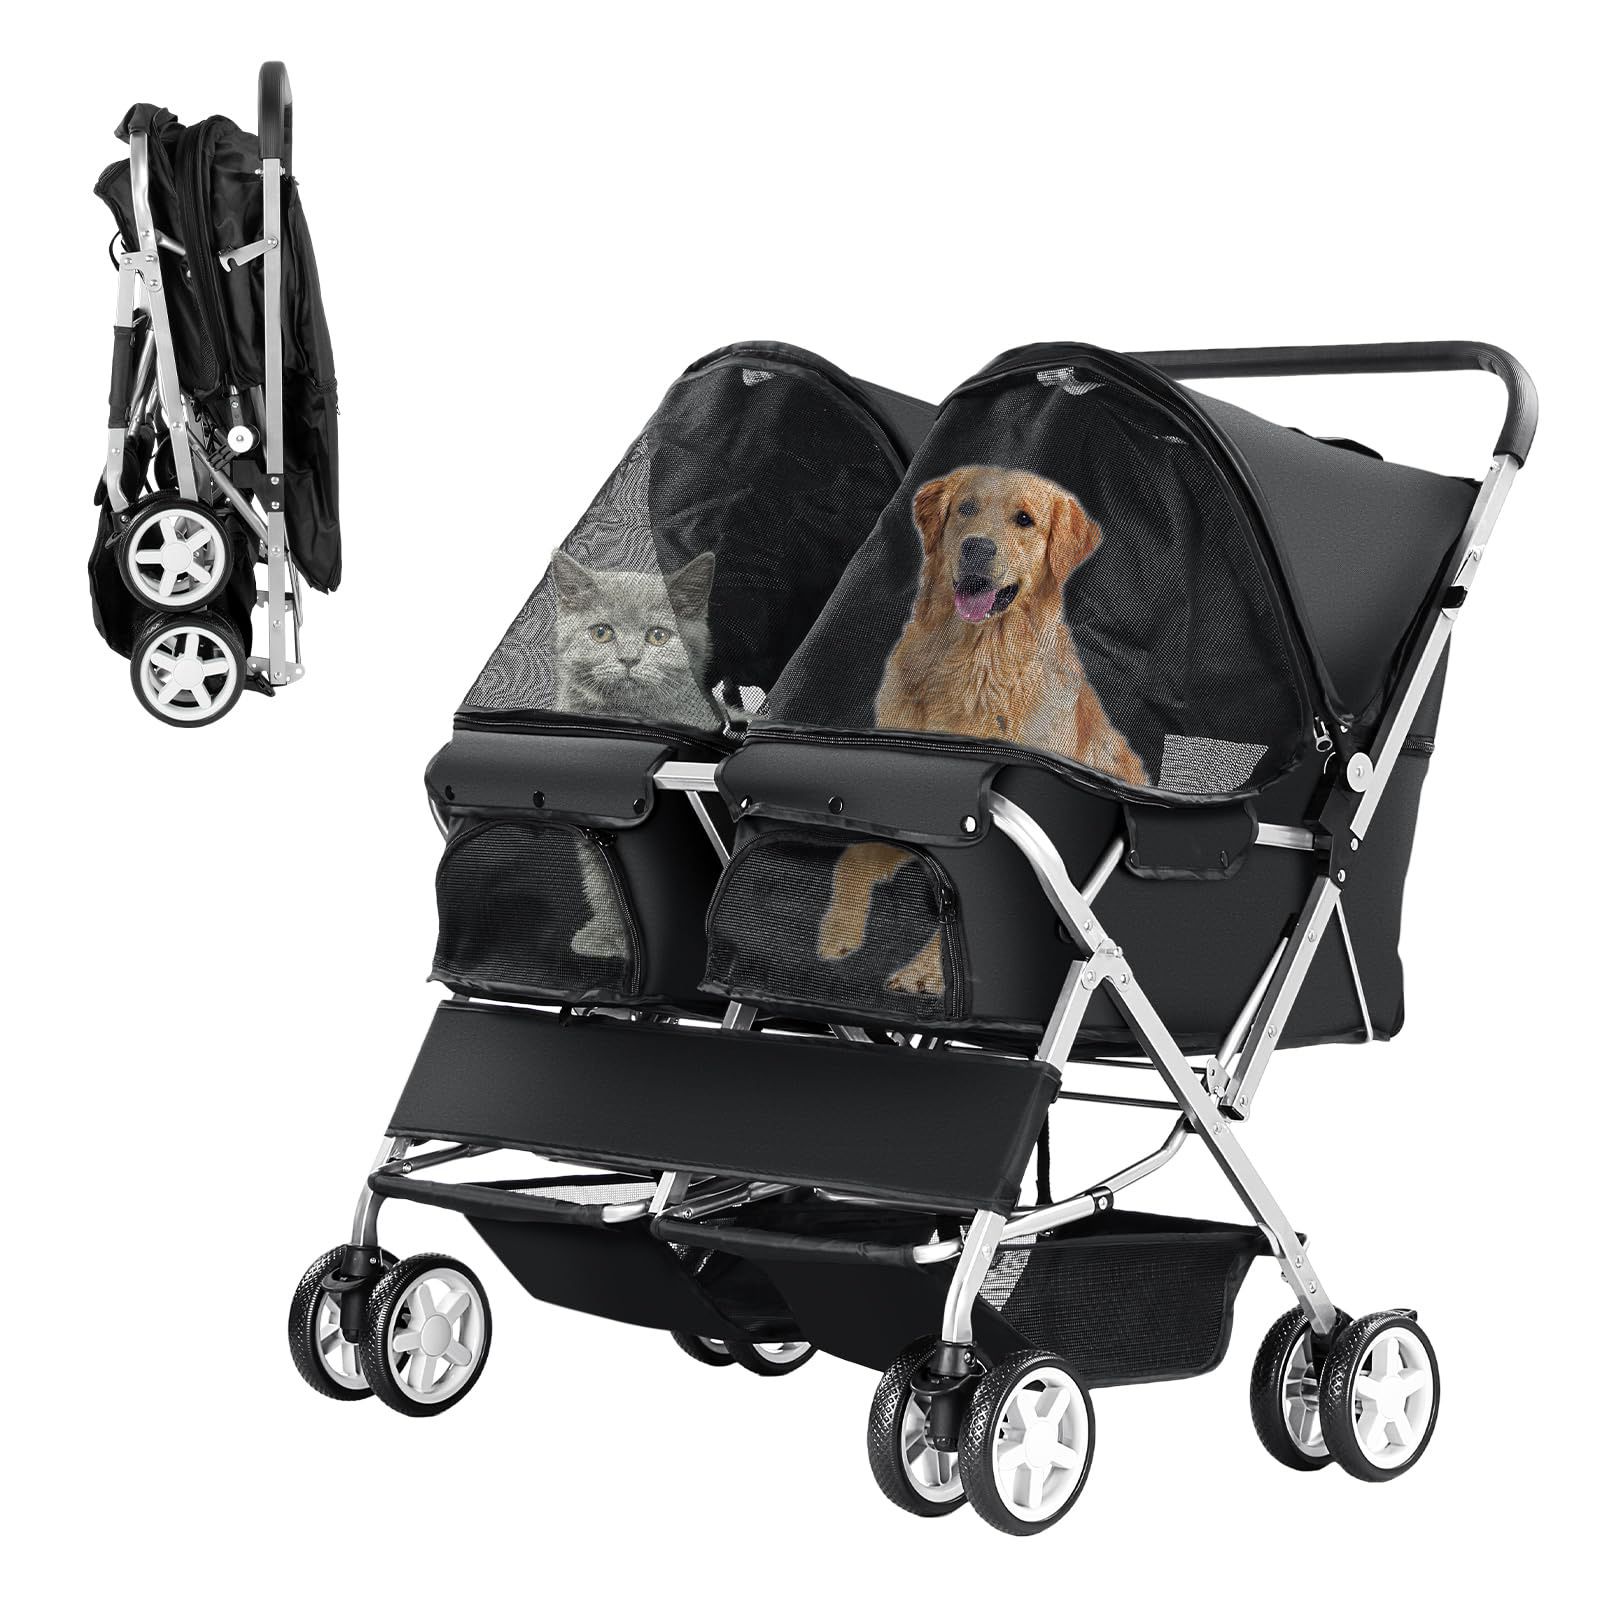 Double Pet Stroller, Foldable Stroller For 2 Dogs & Cats, Two-Seater Carrier Twin Dog Walk Jogger Travel Pet Carriage Cart With Storage, Black